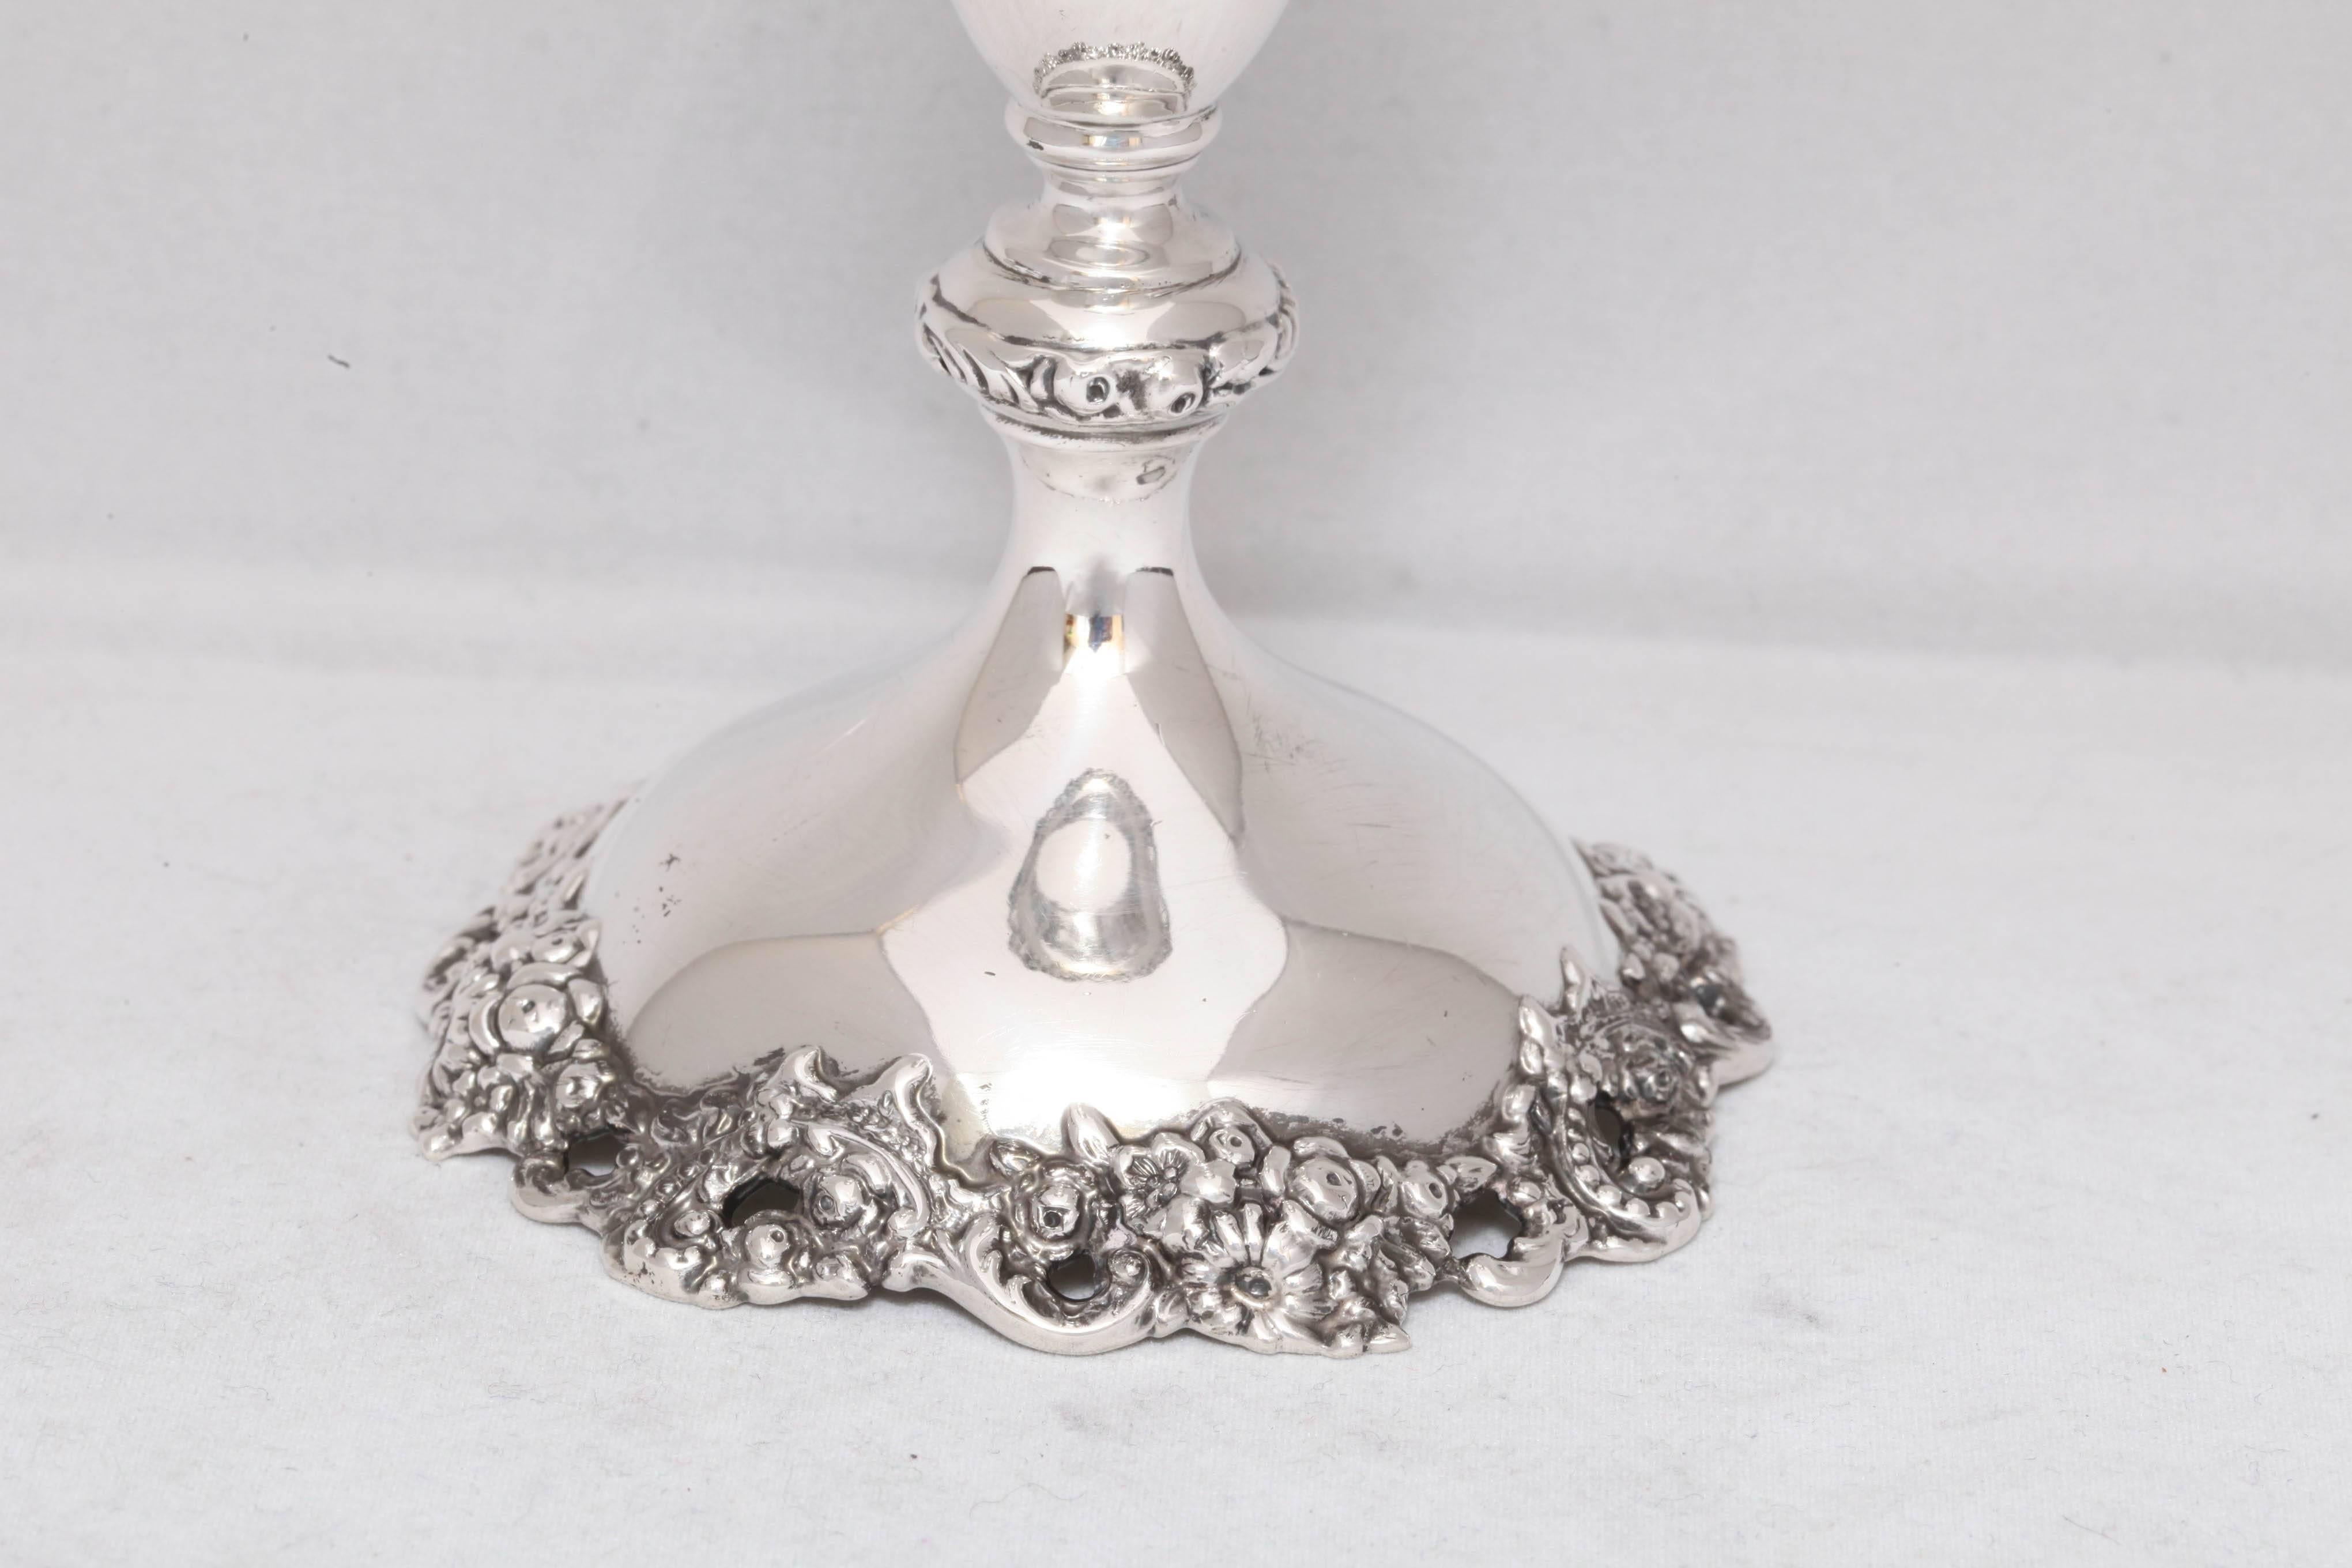 Art Nouveau, sterling silver vase, Theodore B. Starr, New York, circa 1900. Measures: 8 inches high x 3 1/4 inches diameter across opening. Pierced floral motif around opening; motif is picked up on edge of baluster base. Unweighted: weighs 5.105